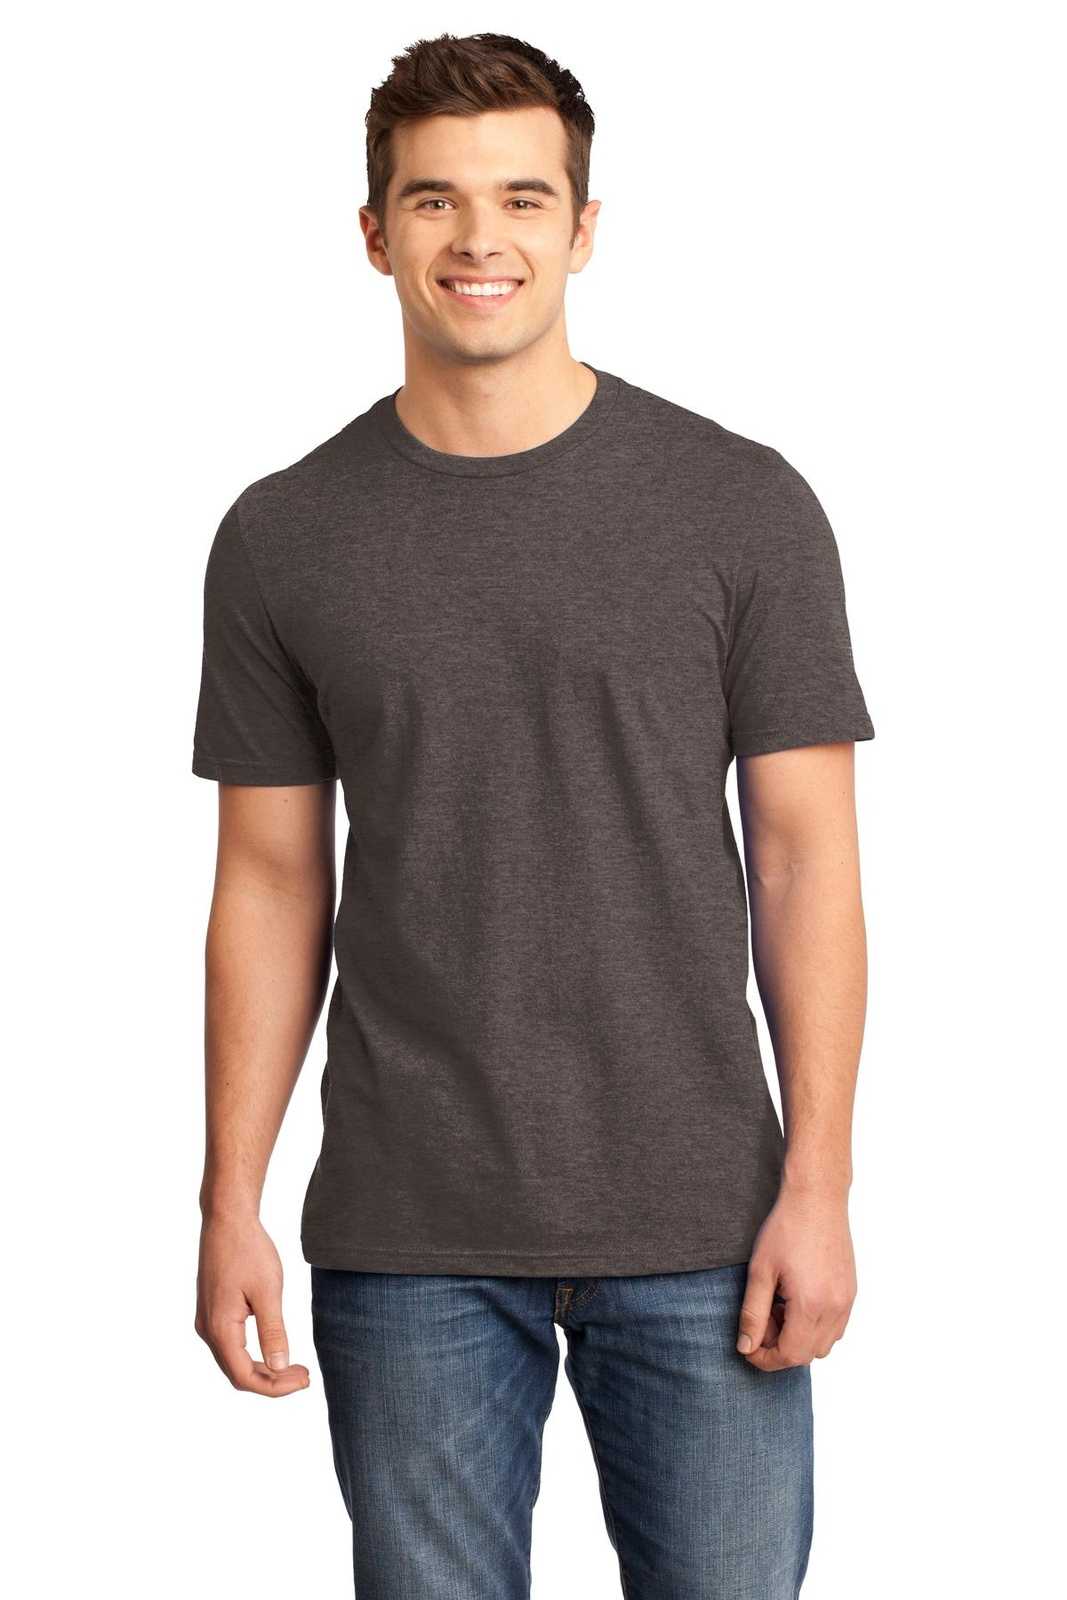 District DT6000 Very Important Tee - Heathered Brown - HIT a Double - 1